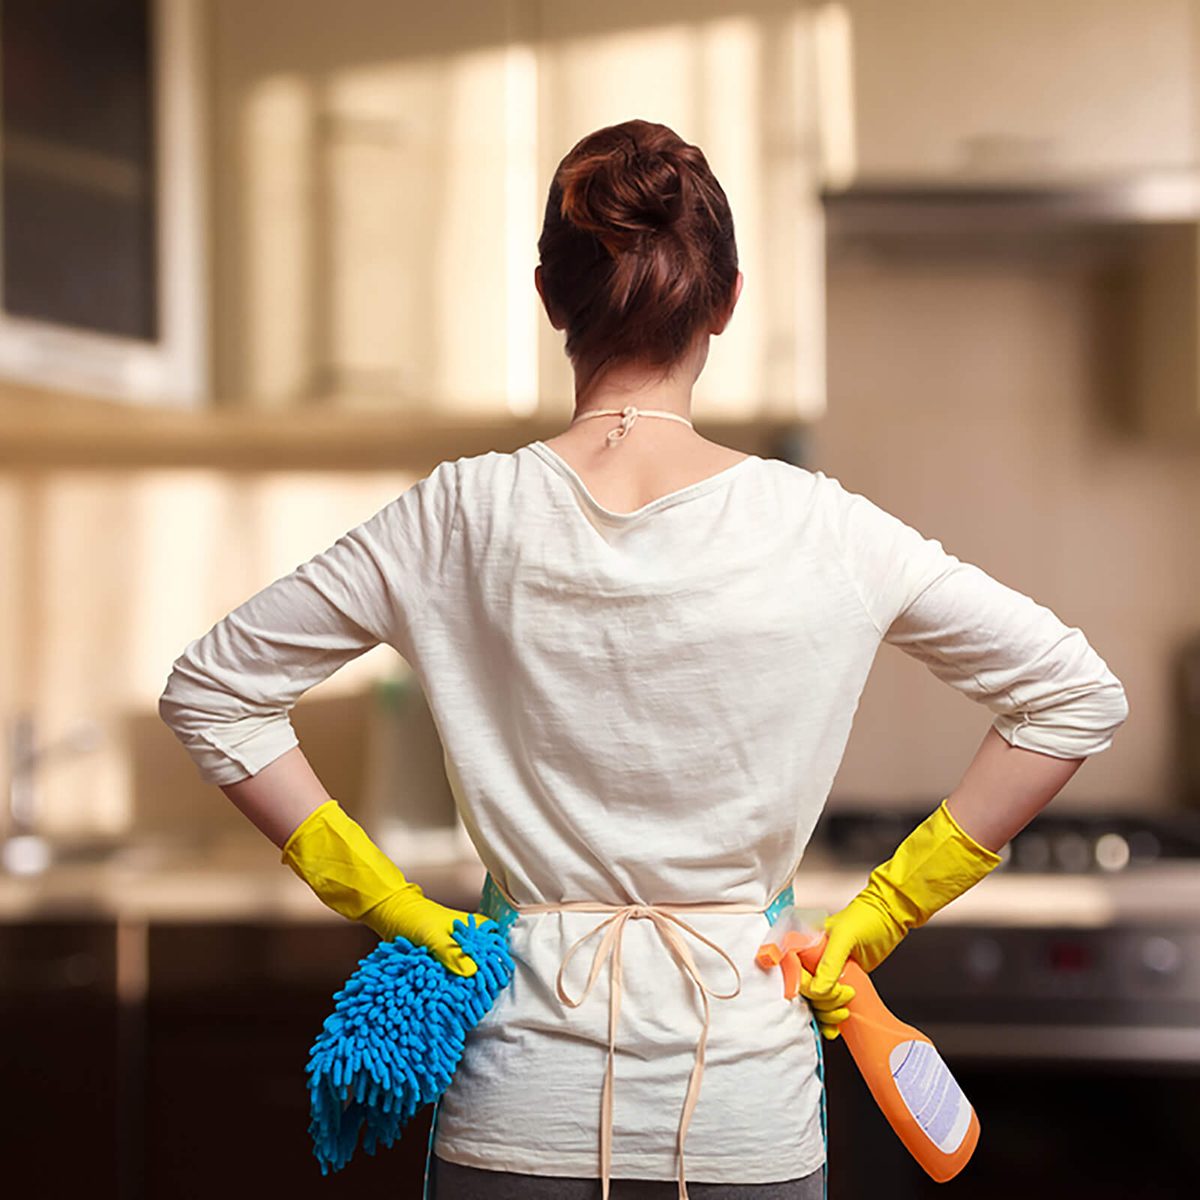 Young woman preparing to clean the kitchen. Standing back